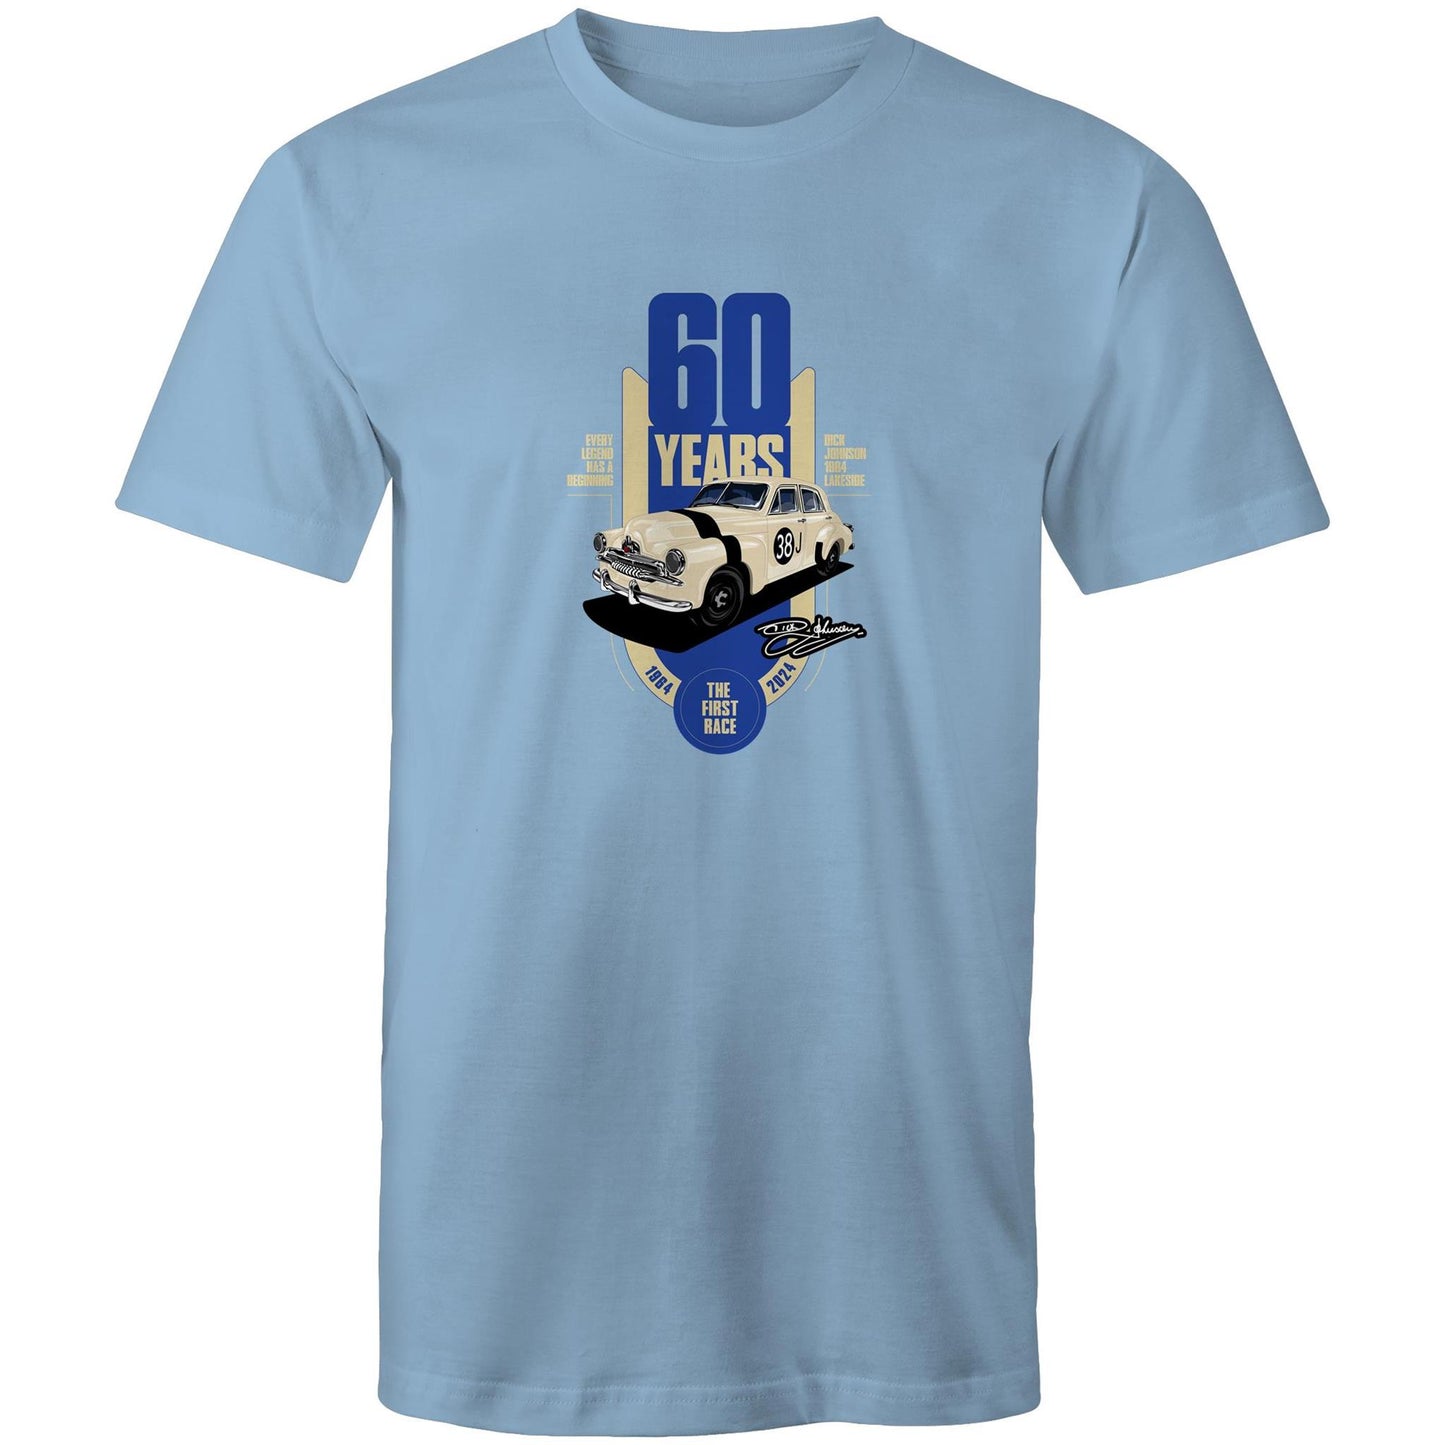 60th Anniversary of Dick Johnson's First Race Tee